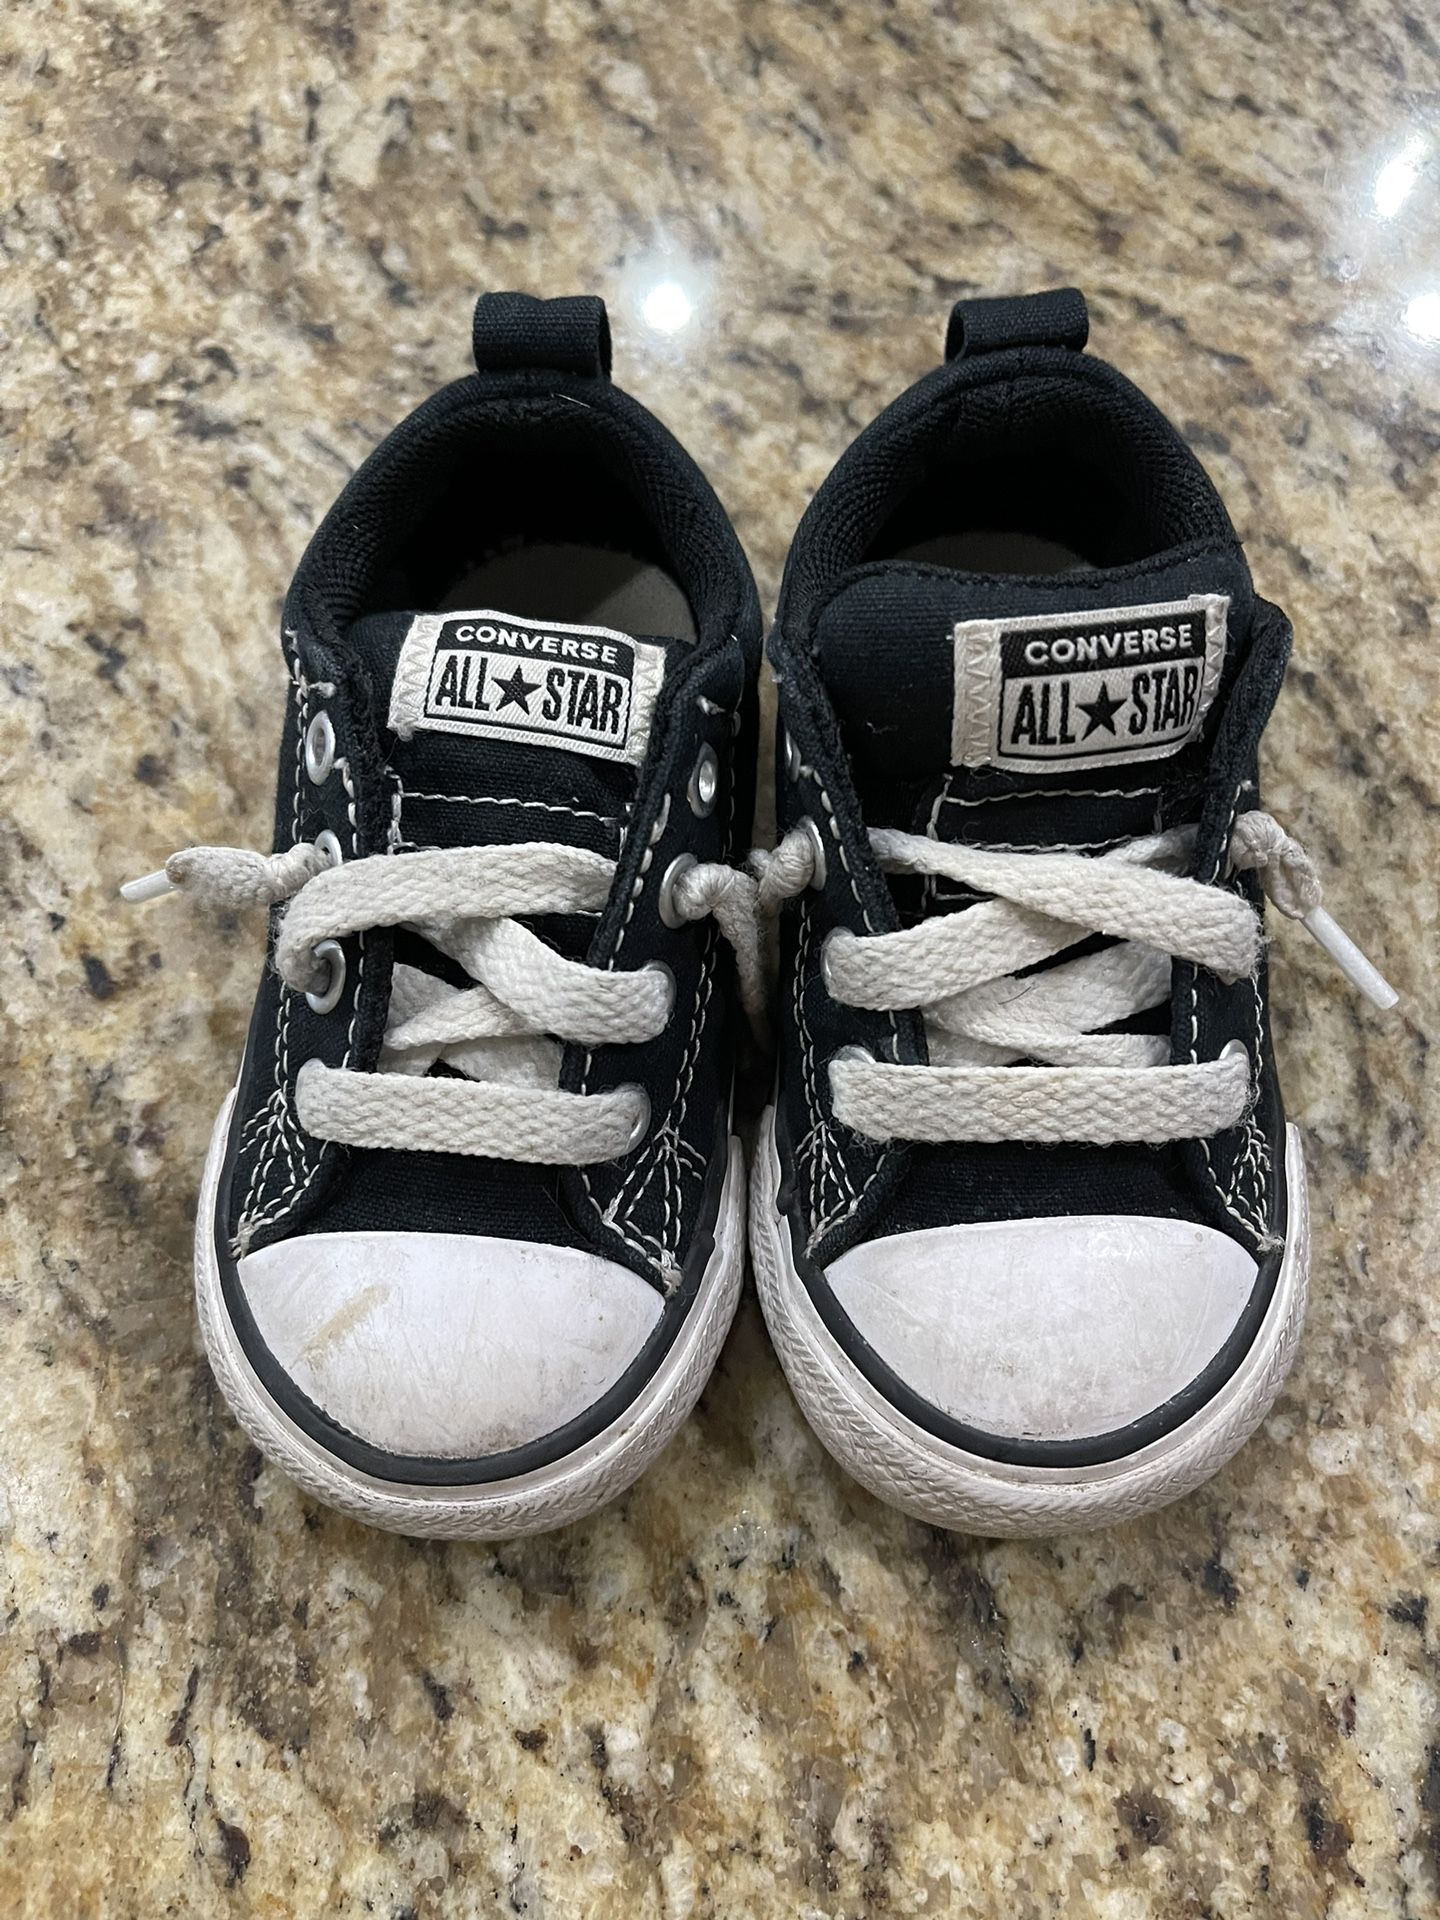 Gutter Helligdom Governable Baby Converse Size 5 for Sale in Queen Creek, AZ - OfferUp